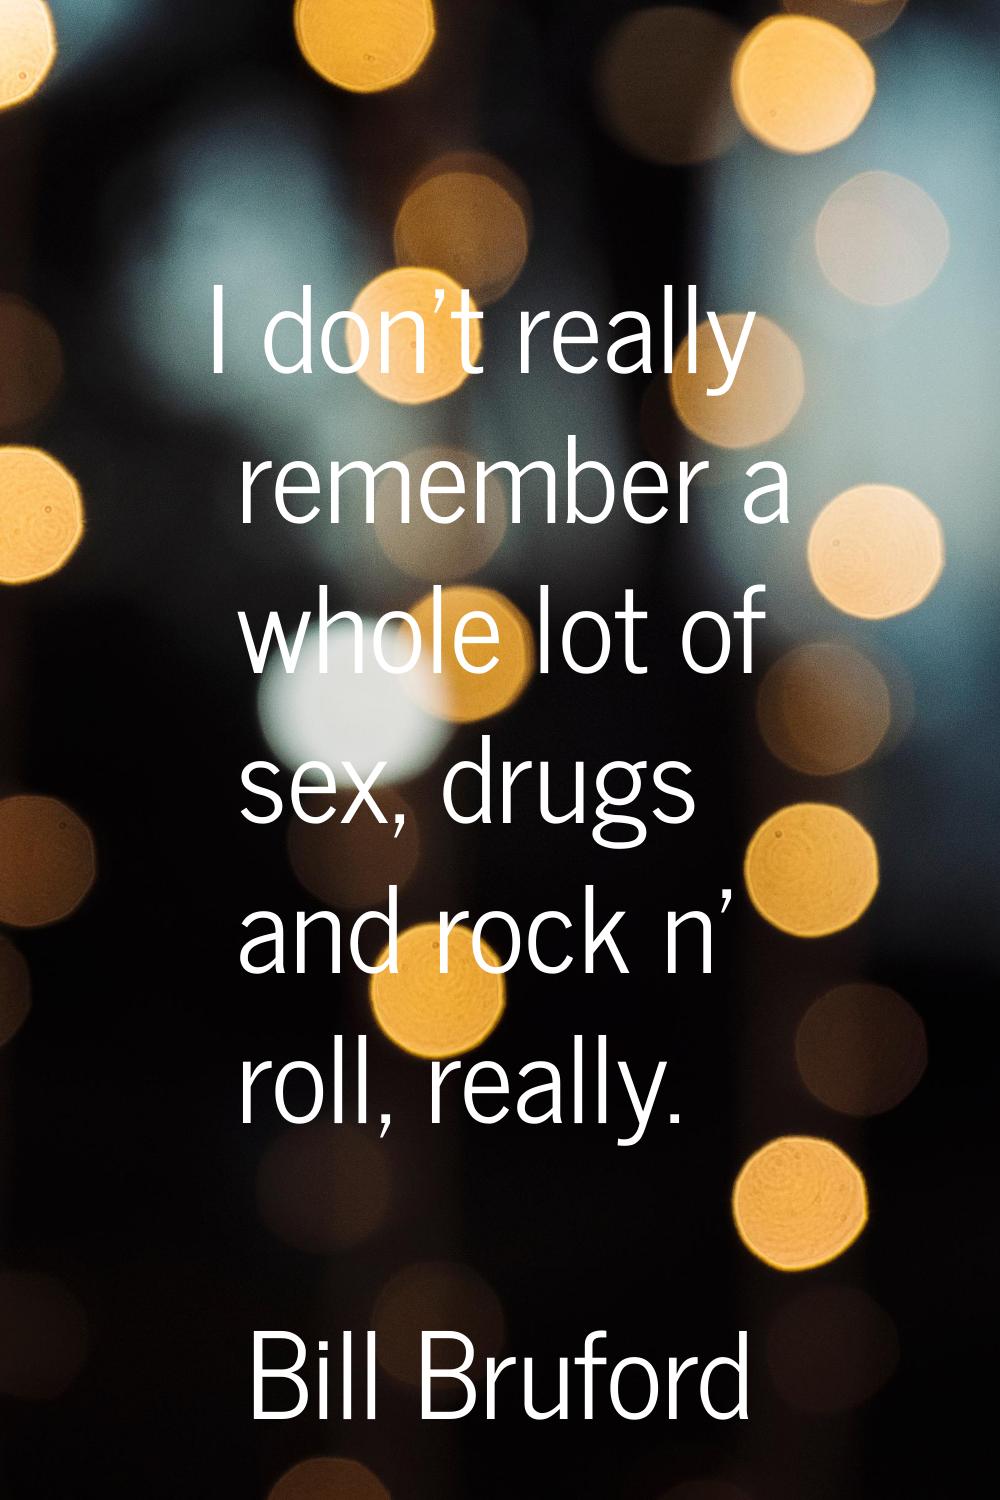 I don't really remember a whole lot of sex, drugs and rock n' roll, really.